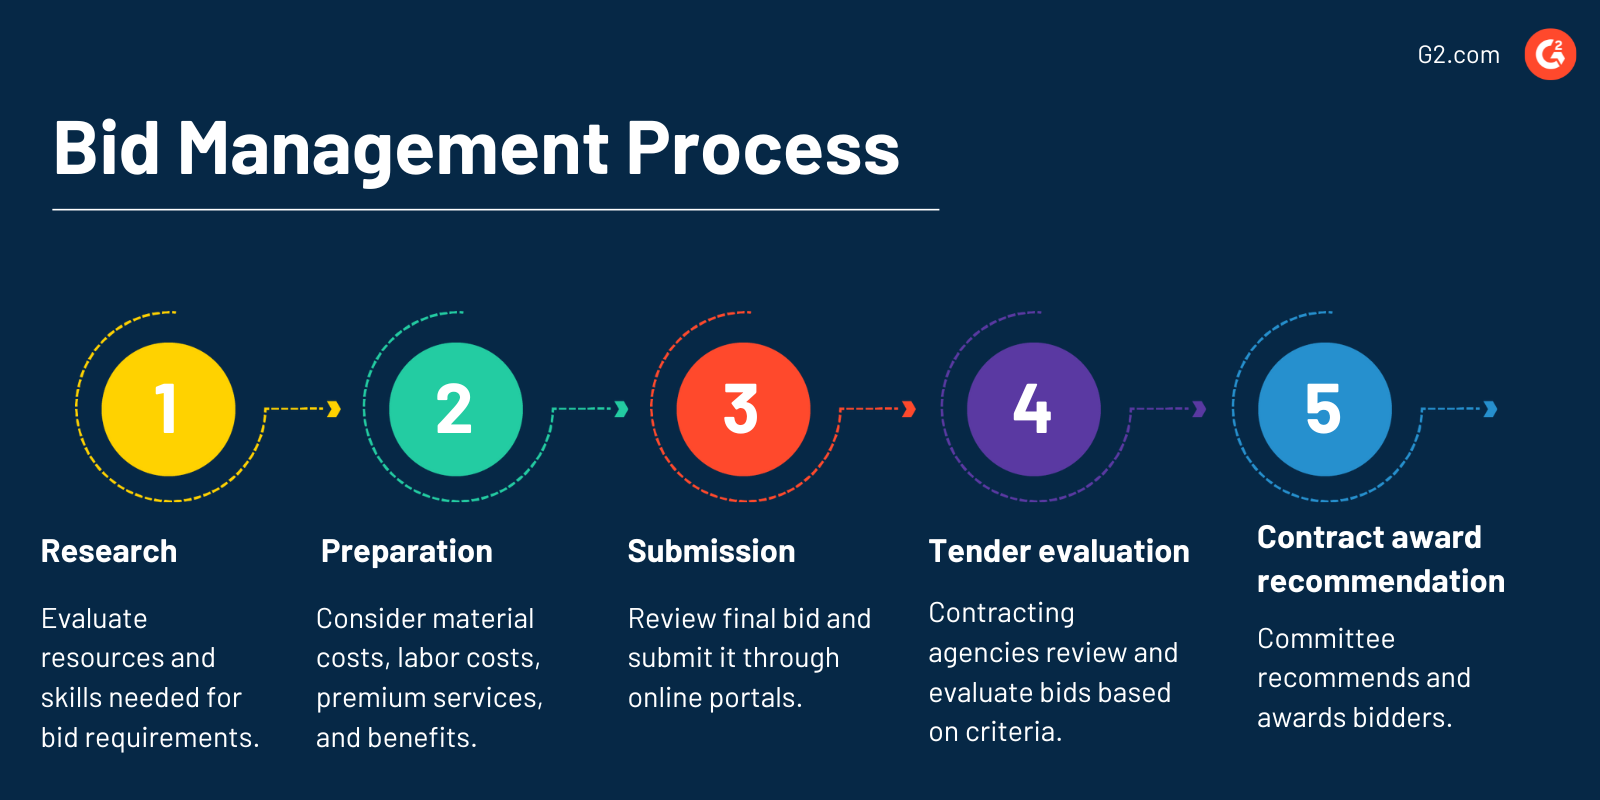 what is assignment of bid means